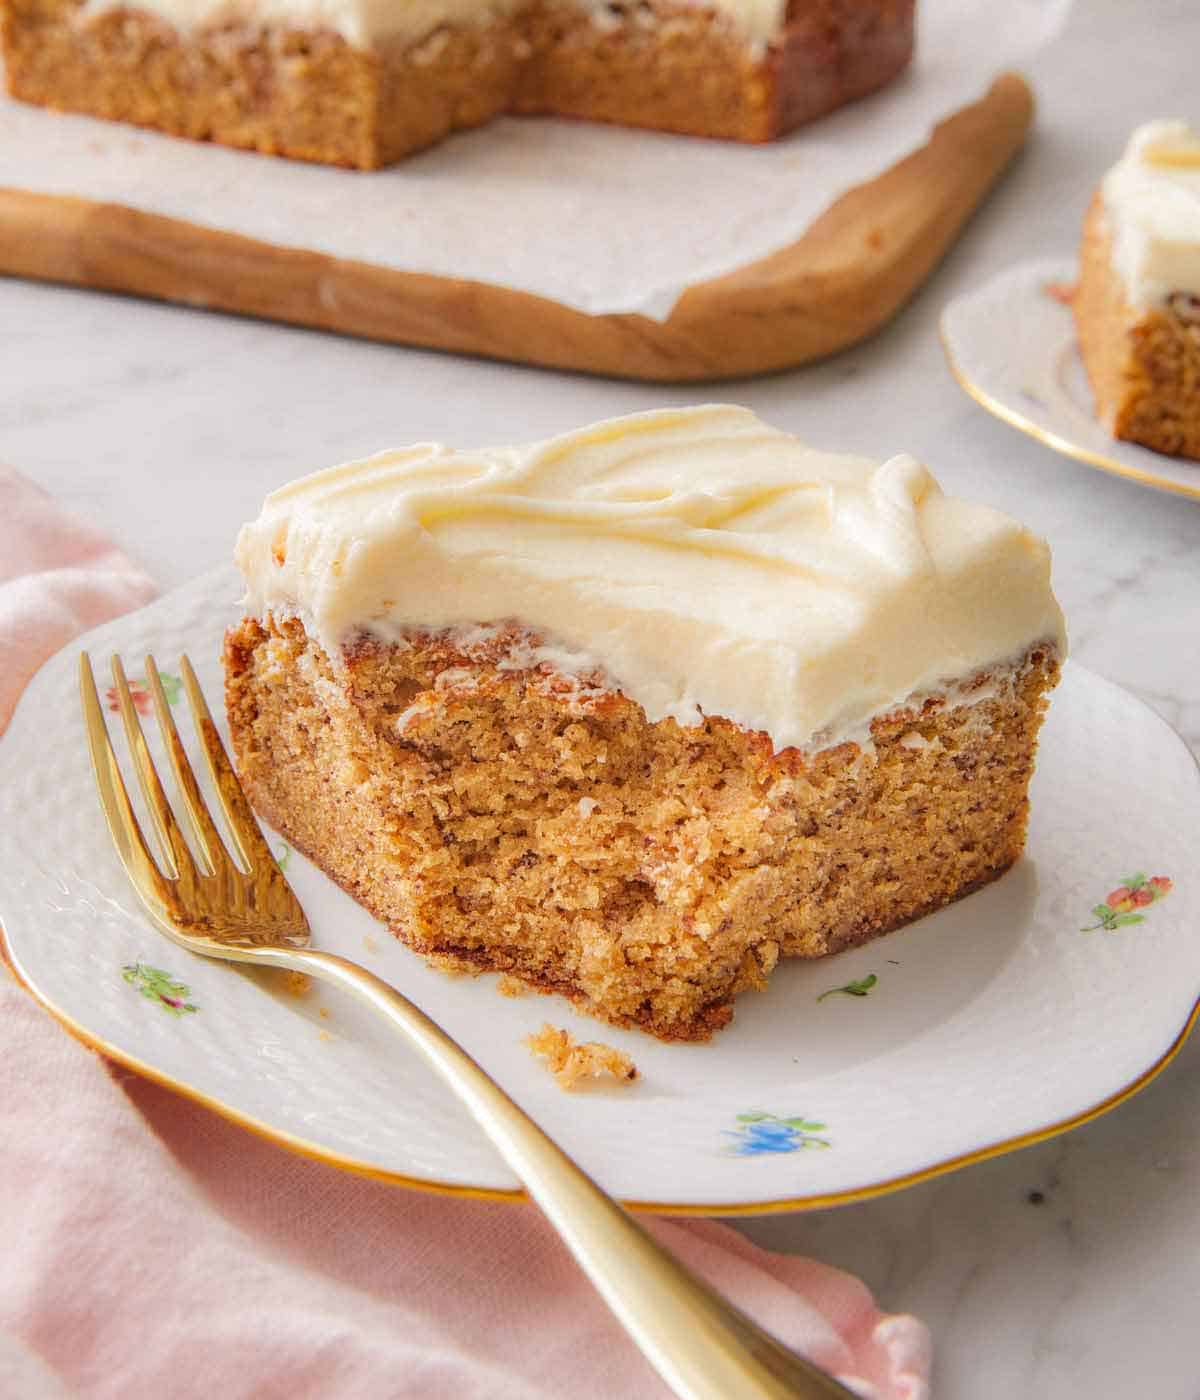 A piece of banana cake on a plate with a fork resting in front.